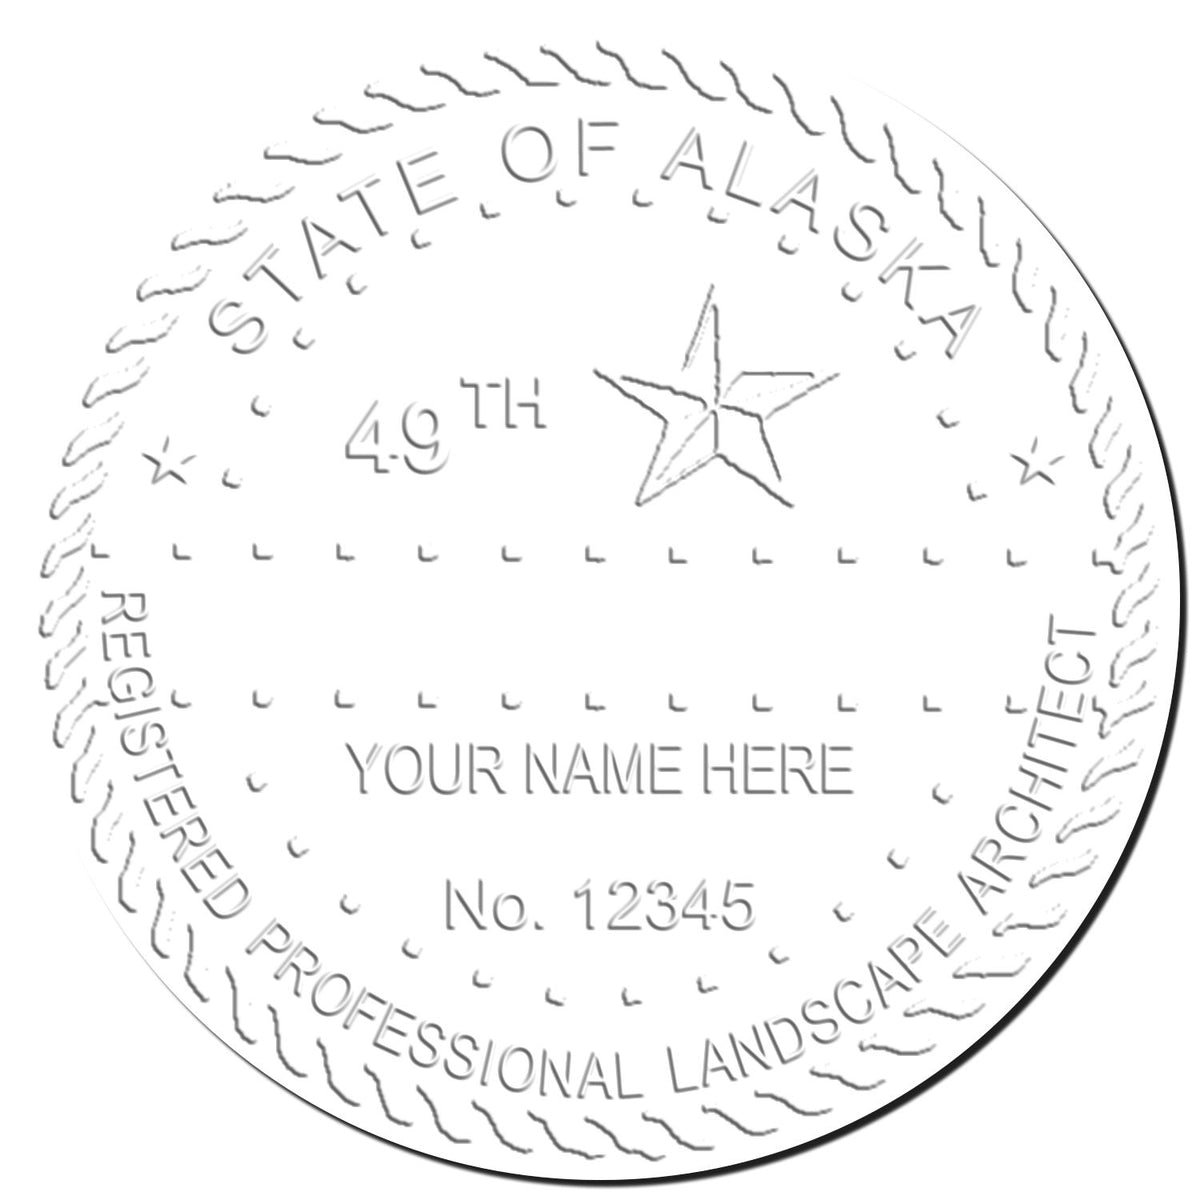 This paper is stamped with a sample imprint of the Gift Alaska Landscape Architect Seal, signifying its quality and reliability.